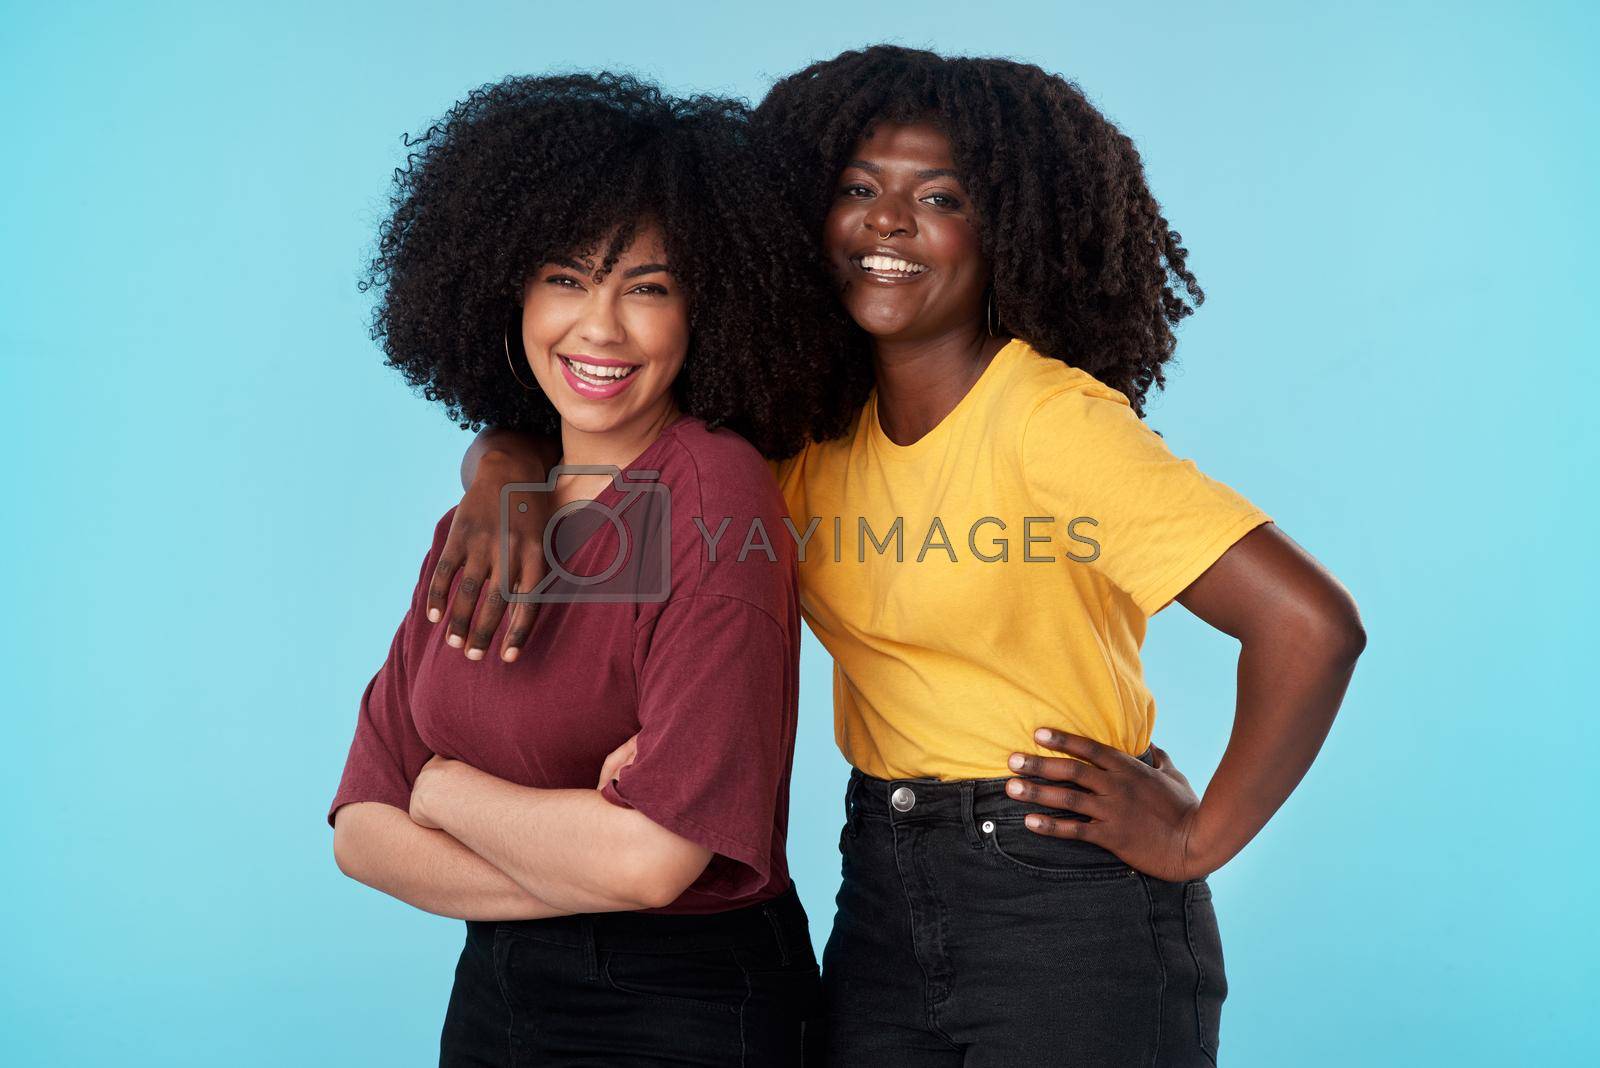 Studio shot of two young women embracing each other against a blue background.